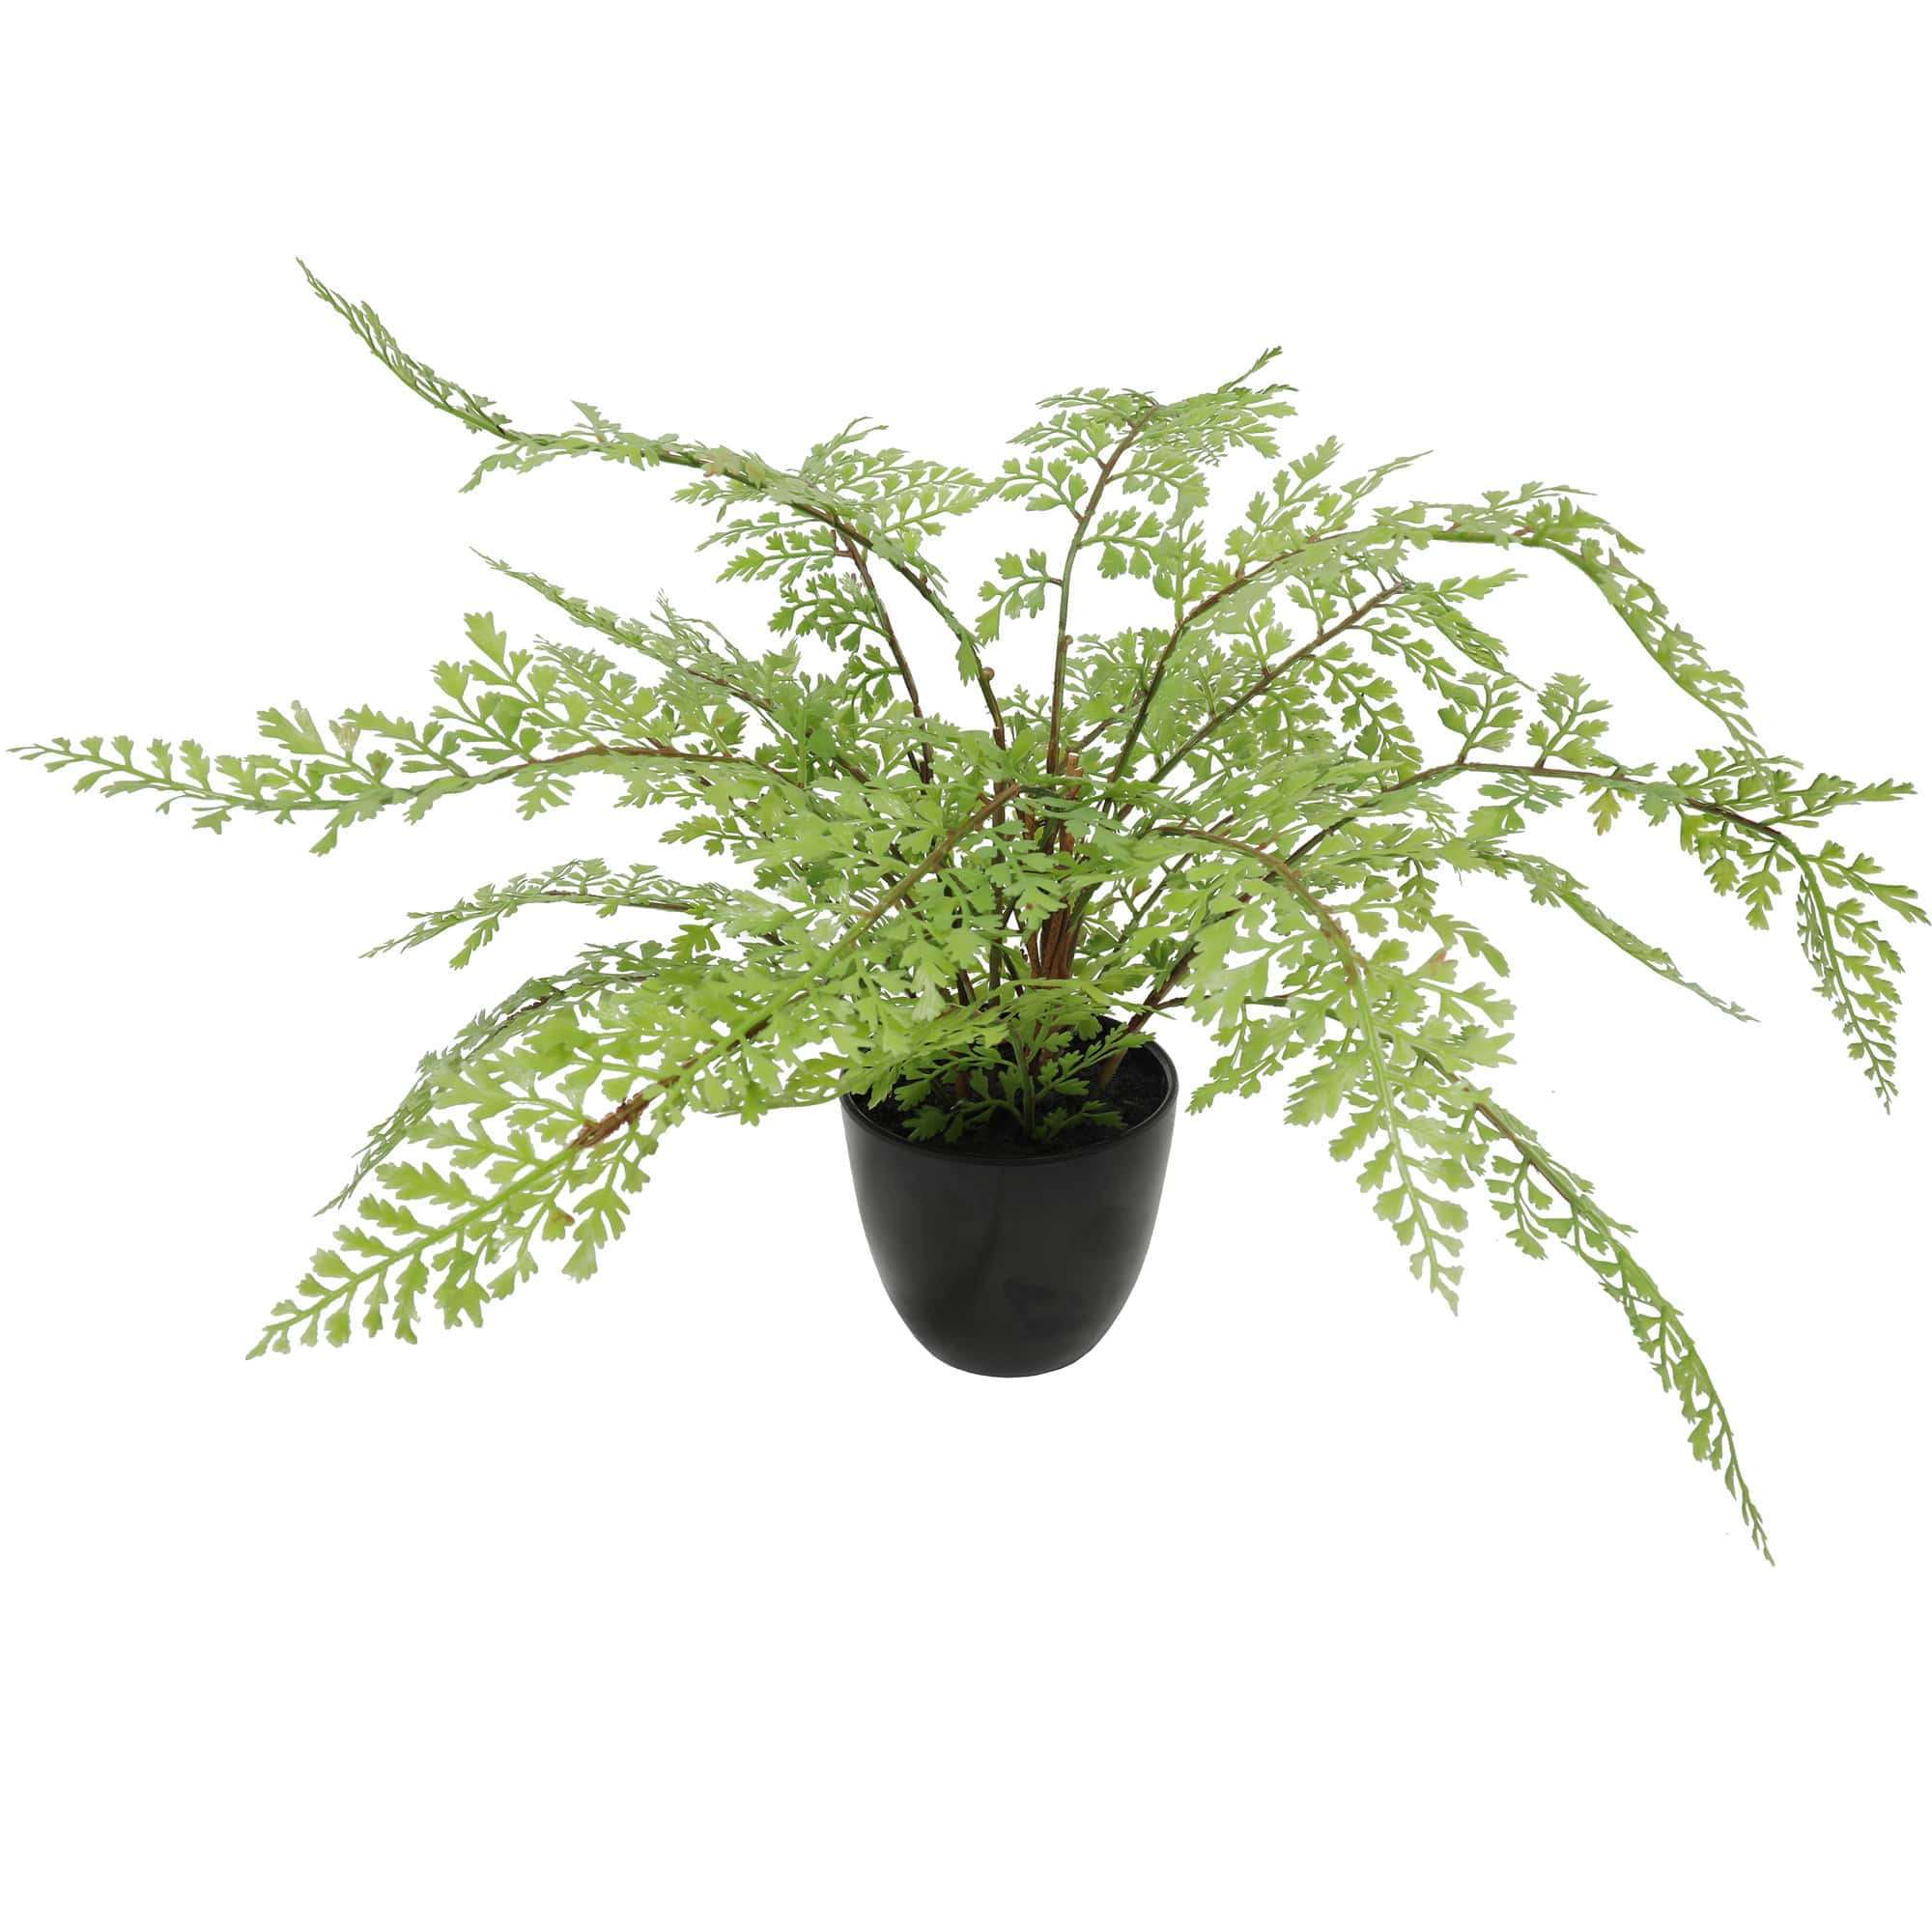 Faux Small Potted Fern 35cm - Designer Vertical Gardens artificial green wall sydney Artificial Shrubs and Small plants